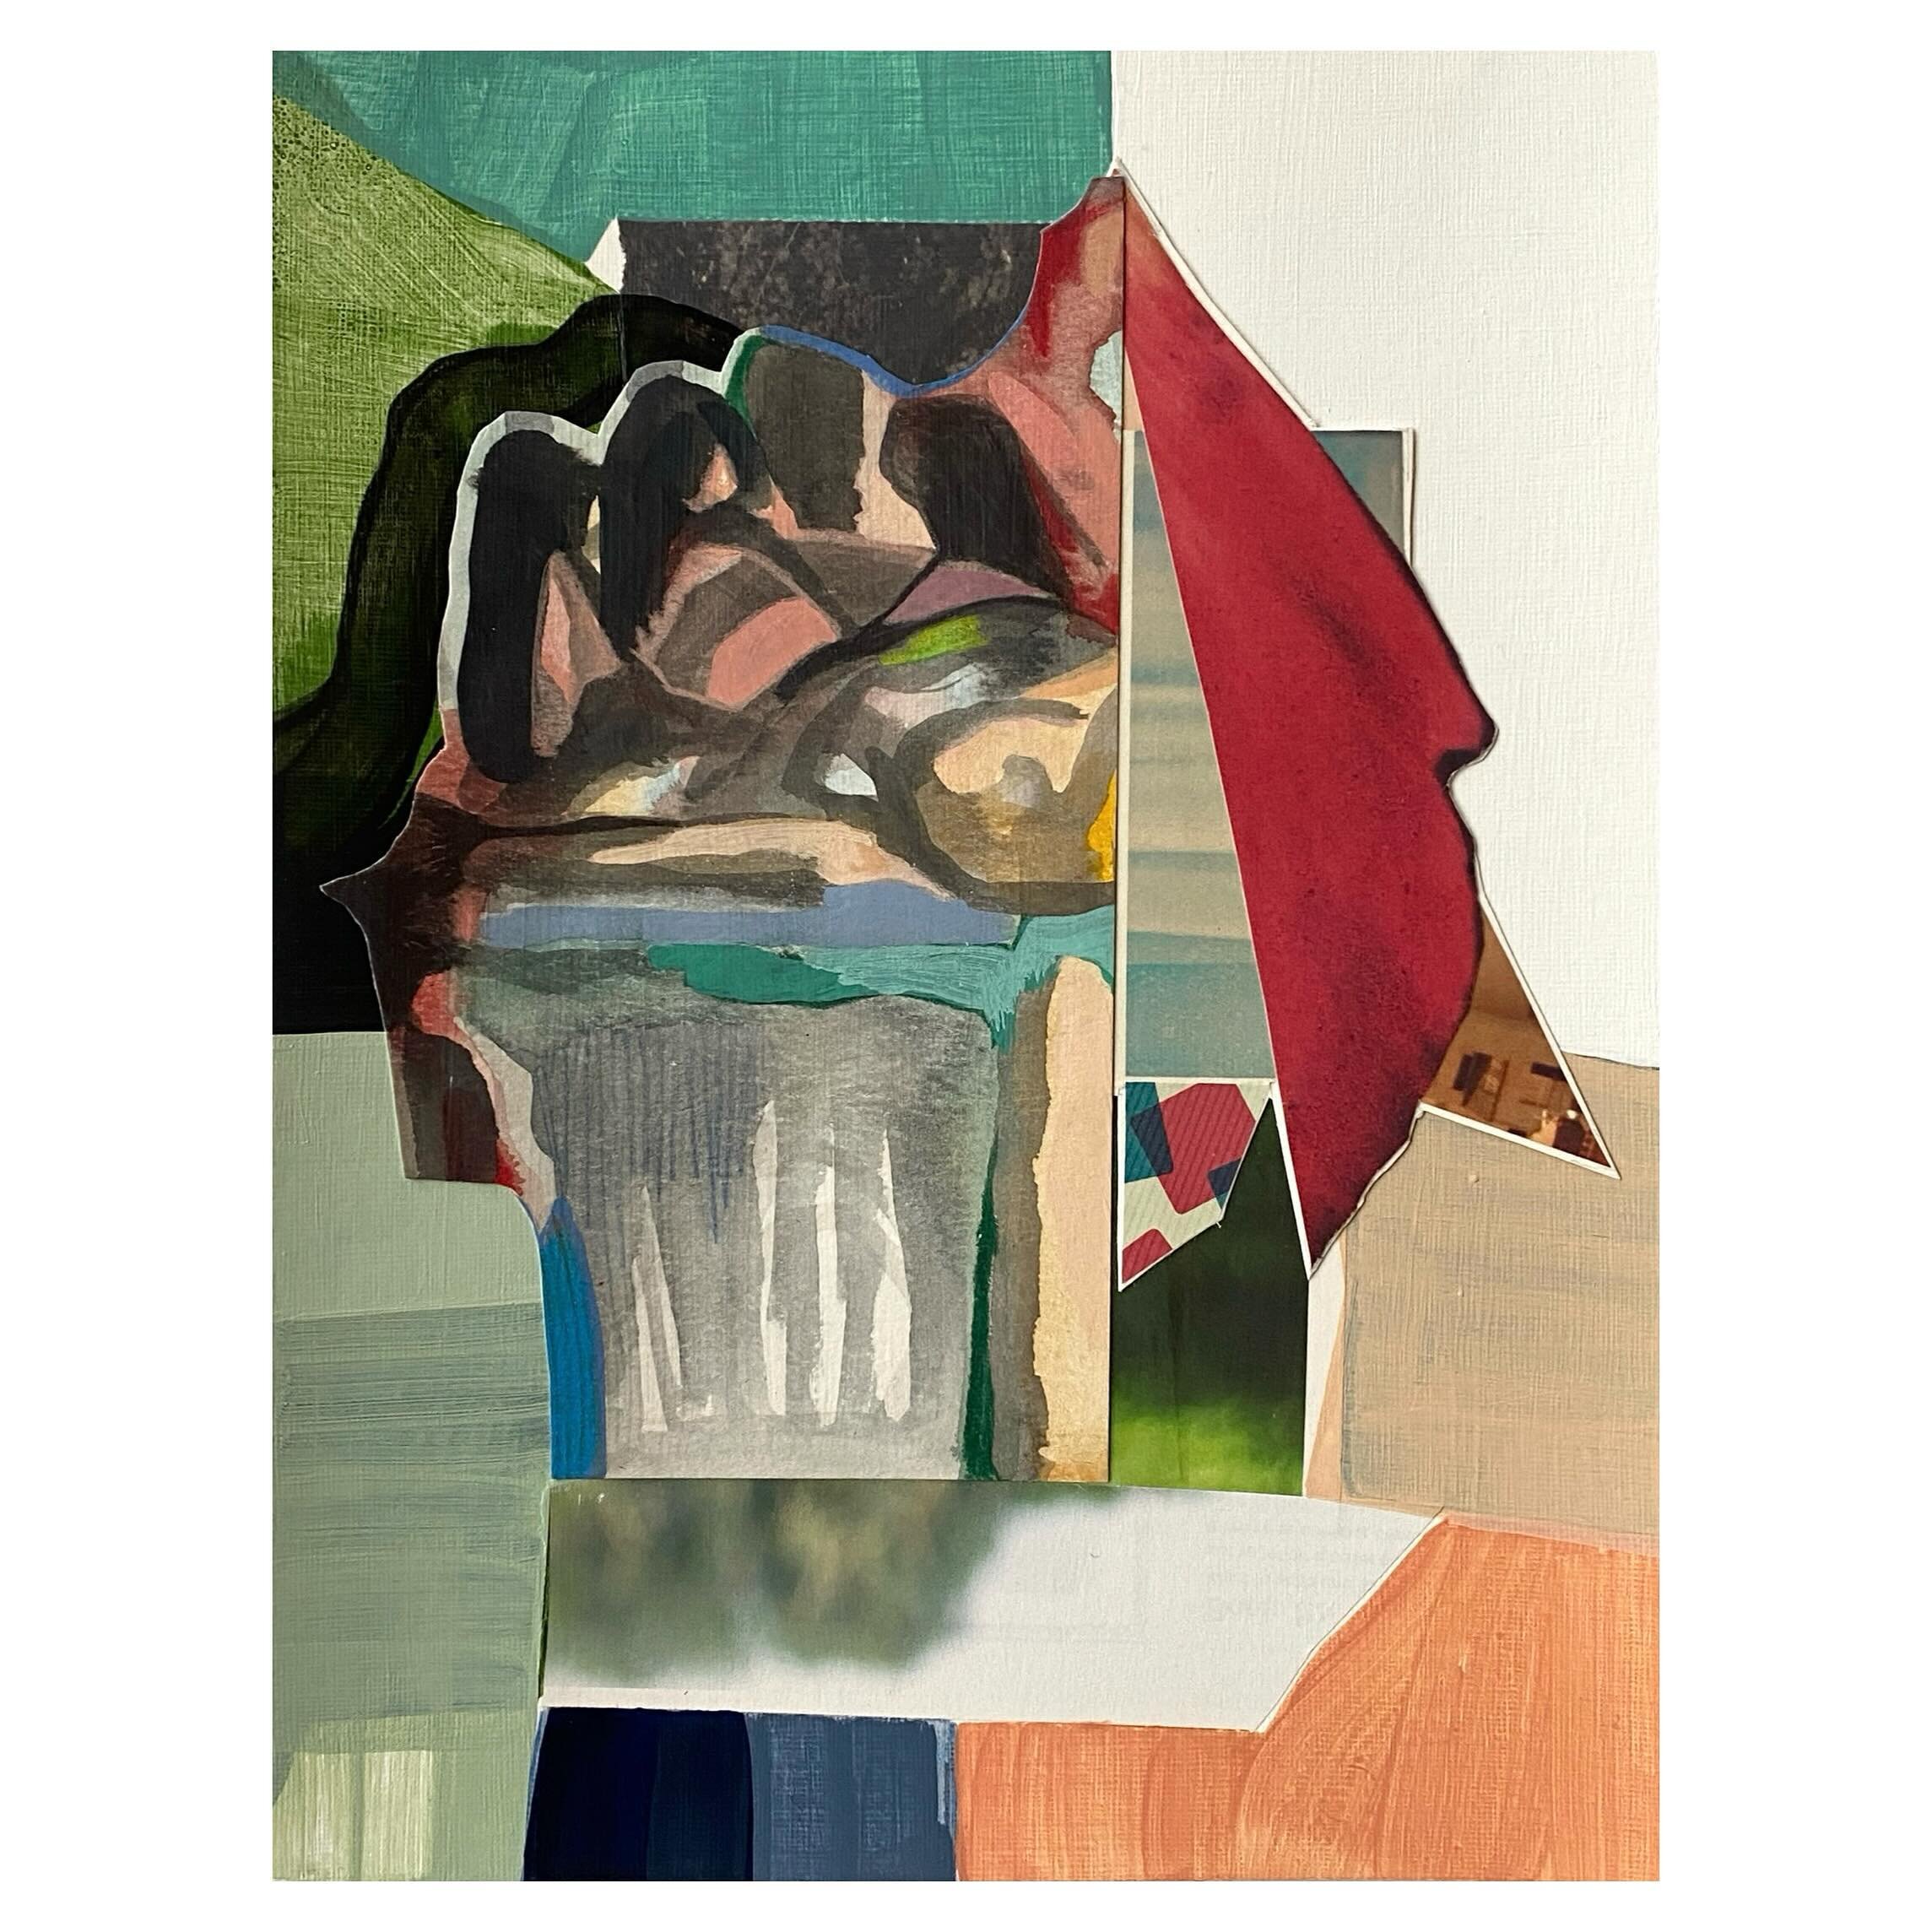 D a y s  9 3 &amp; 9 4
.
found and painted papers, watercolor, pencil, and acrylic on acrylic paper
9&rdquo; x 12&rdquo;

#artistmother #mixedmediapainting #collagework #100daysofcollage